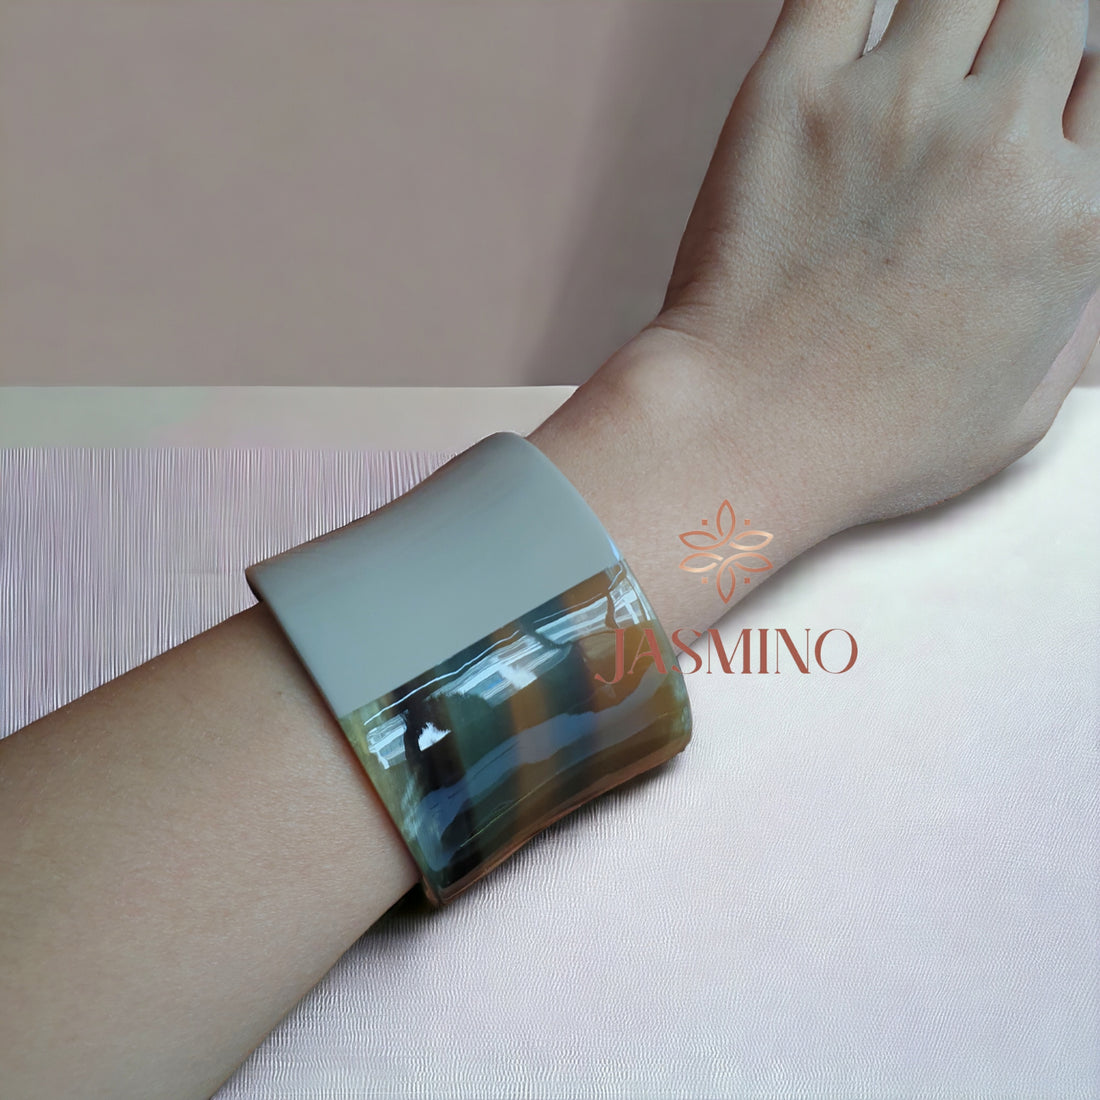 Jasmino unique handmade natural buffalo horn cuff bracelet feature ash half for women on Birthday gifts